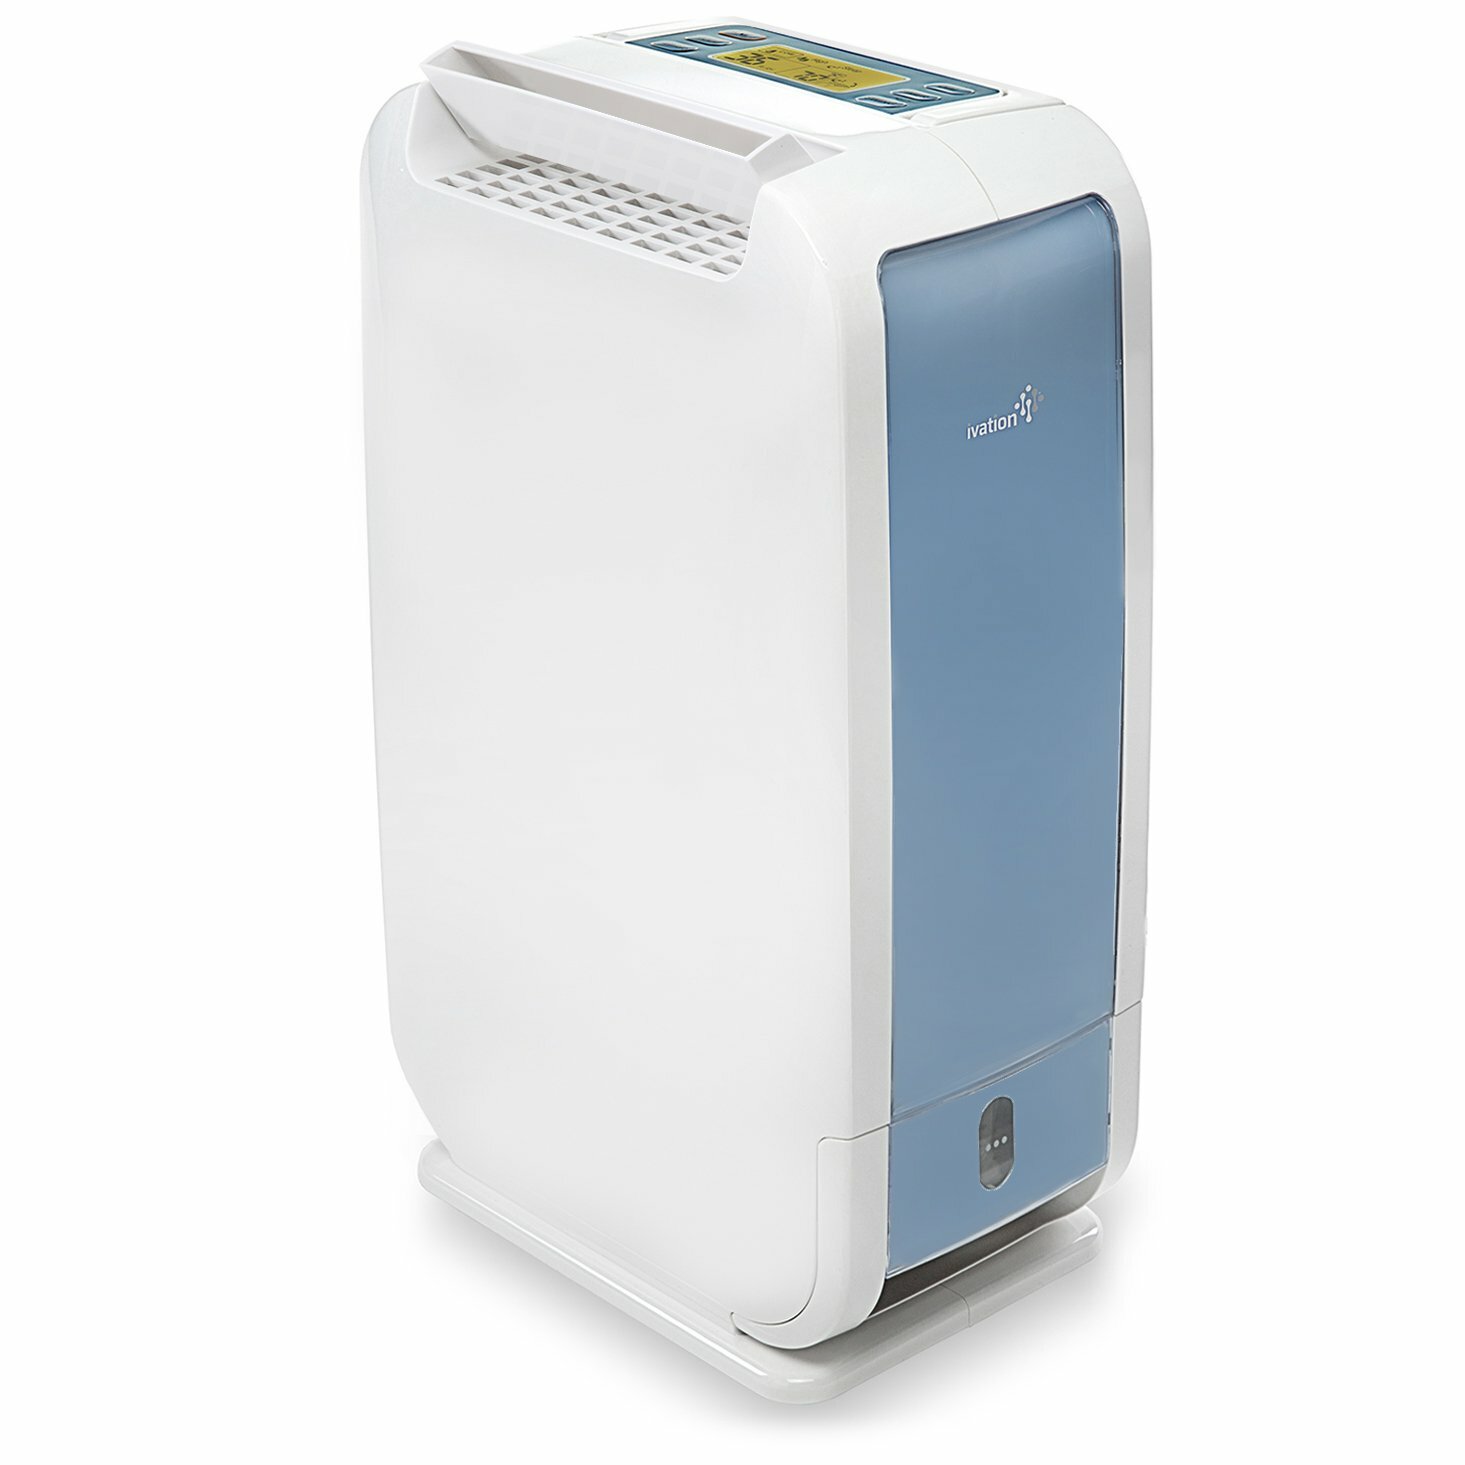 R.W.FLAME 30 Pints per Day Console Dehumidifier for Rooms up to 1500 Sq.  Ft. & Reviews